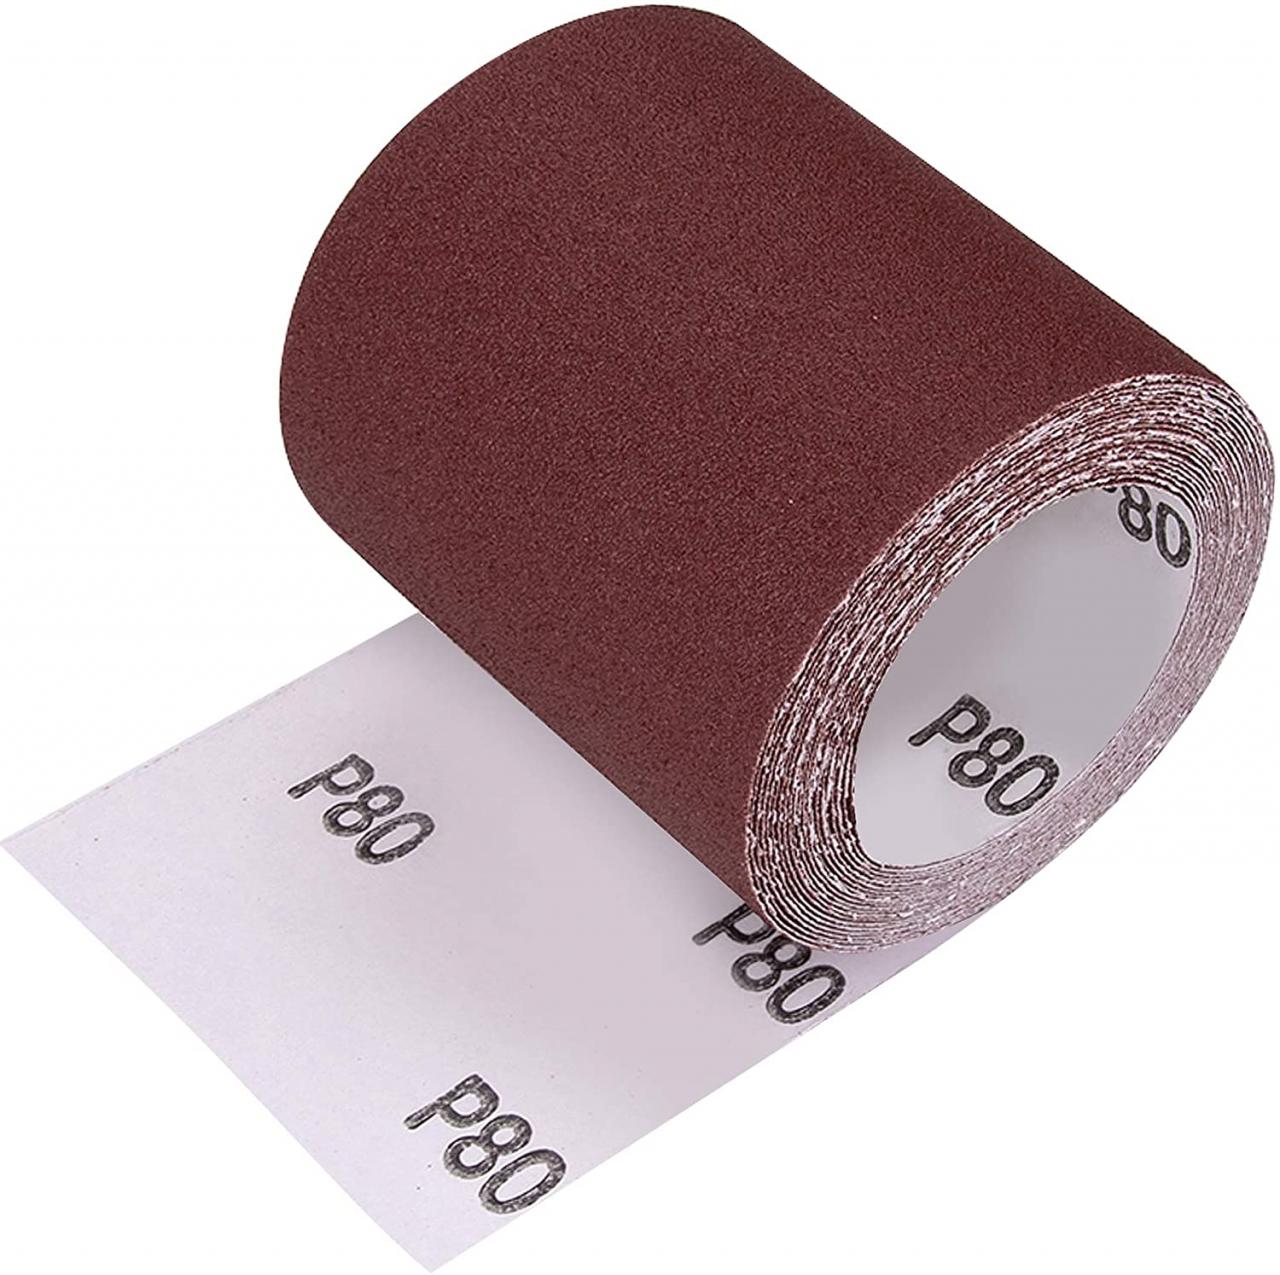 Buy Red Label Abrasives 3 Inch X 70 FT 120 Grit Woodworking Drum Sander  Strip Roll, Cut to Length Online in Nigeria. B00DH0EZW4